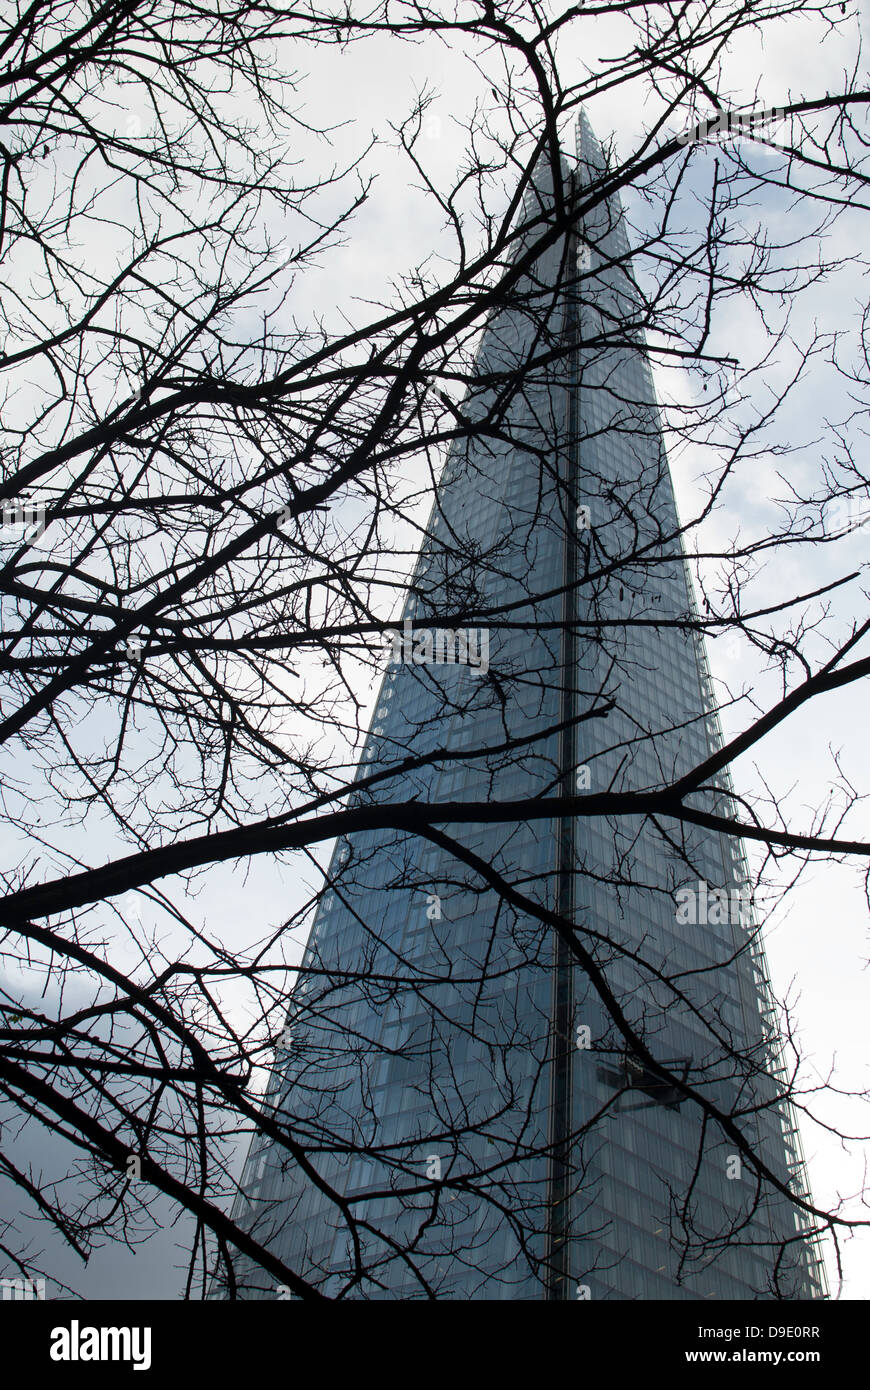 The Shard building shrouded by the branches of a tree in Tooley Street, London, England. Stock Photo